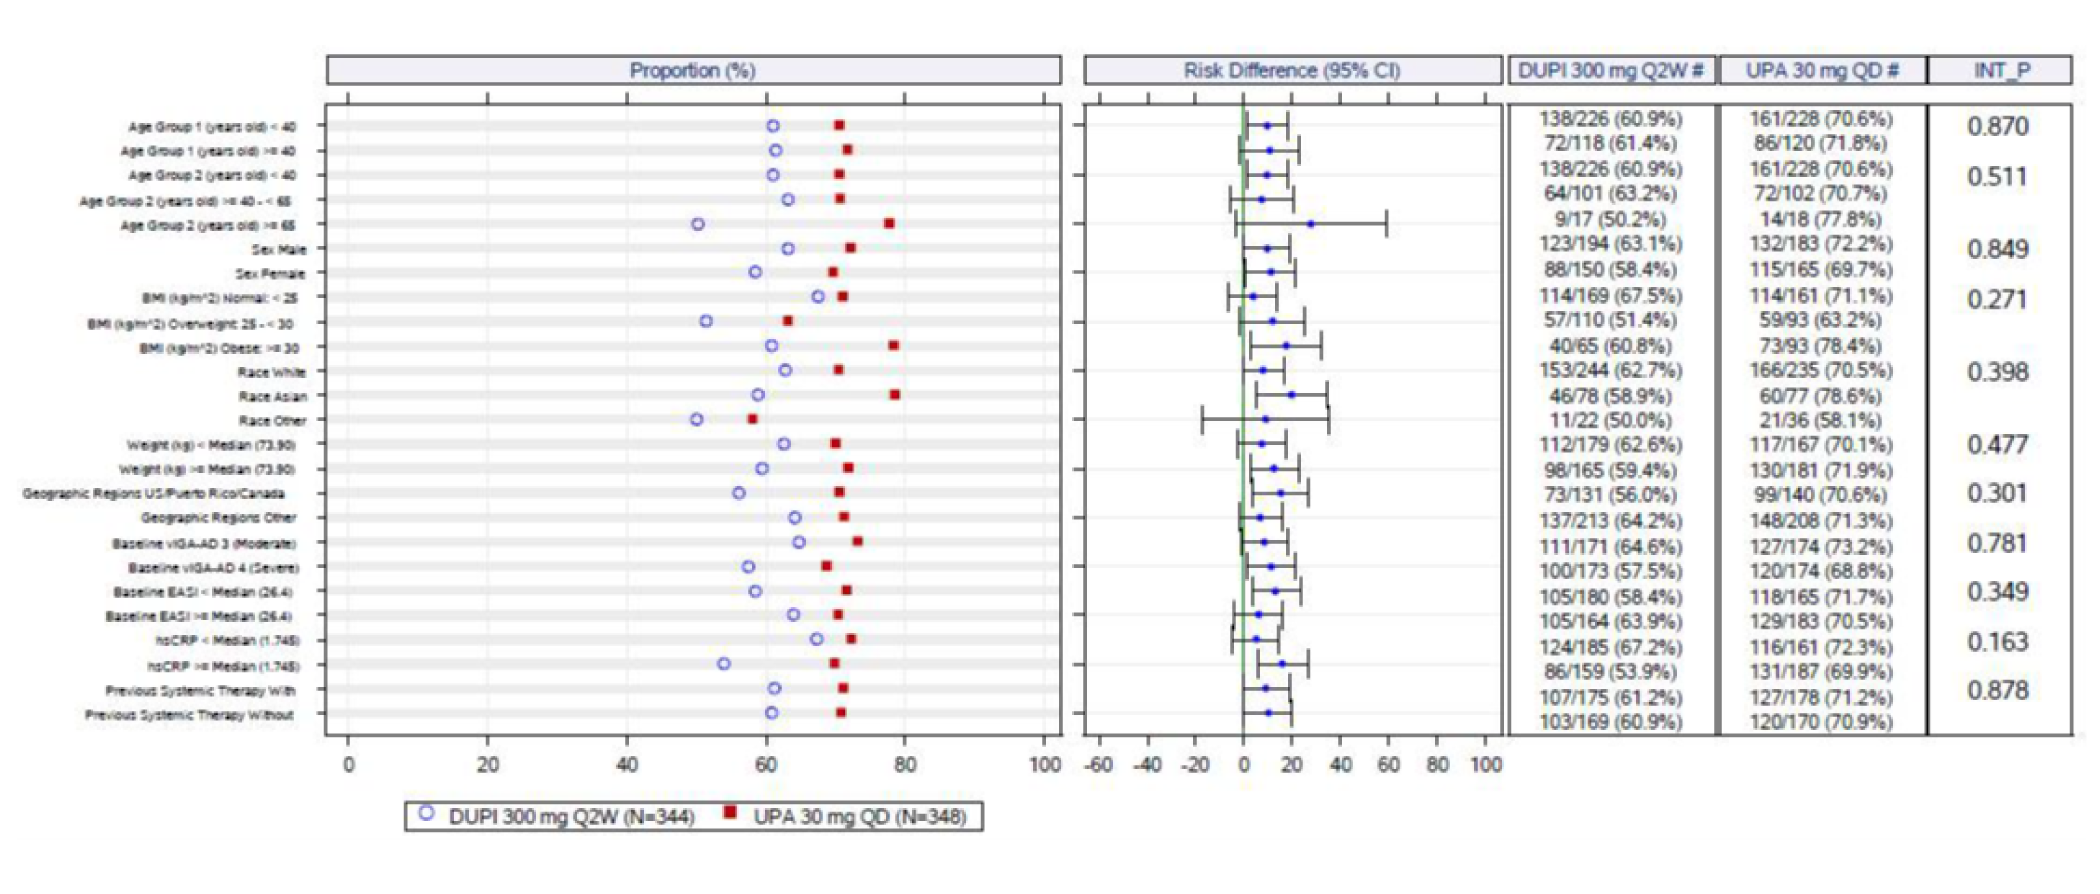 The figure depicts the proportion of patients achieving EASI 75 in different subgroups as measured in the HEADS UP study with no subgroup being statistically significant.